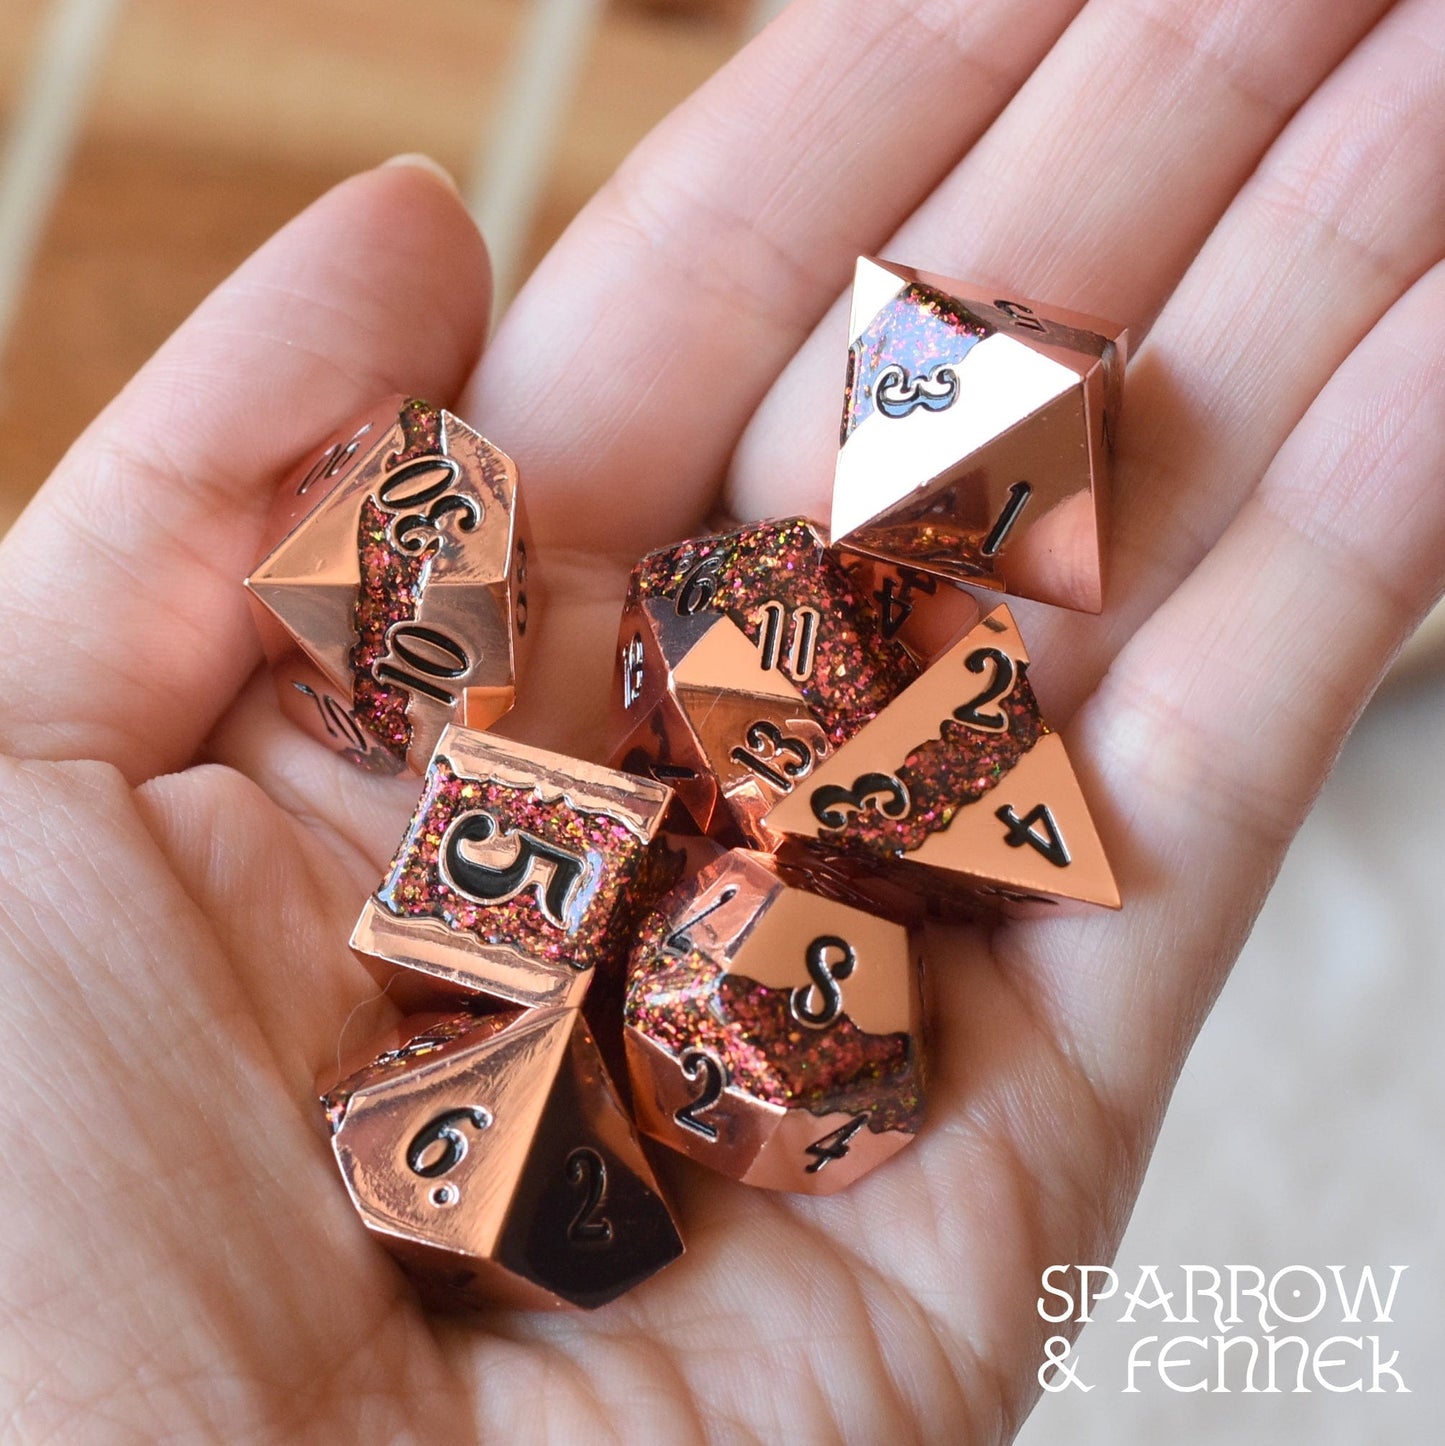 Fissure Metal Dice Set Copper and Red